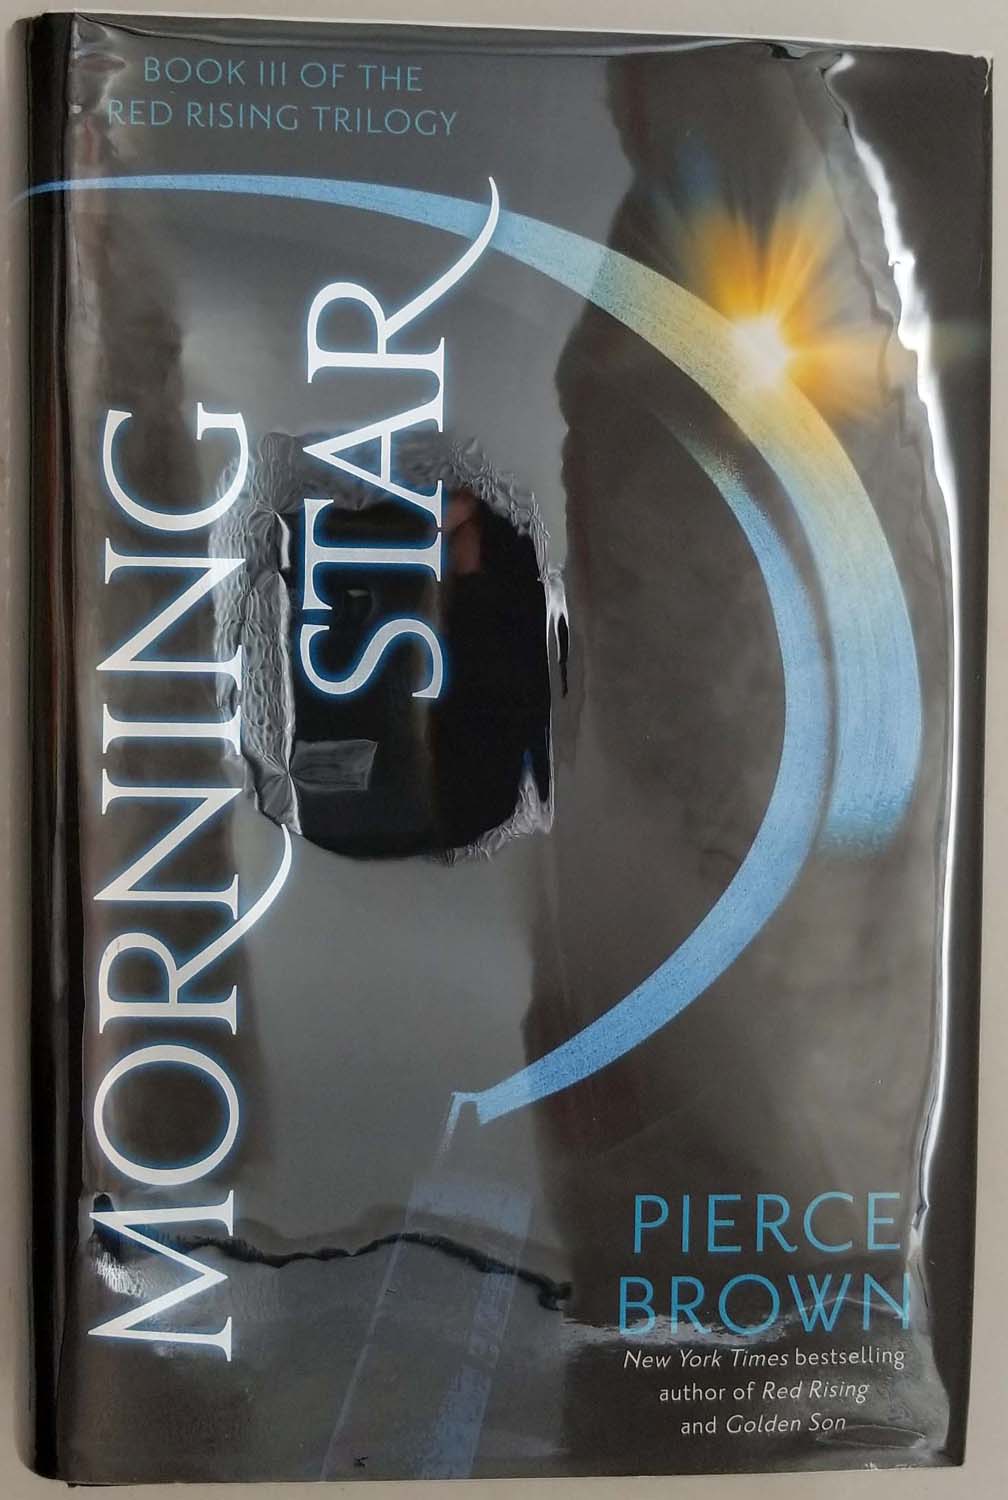 The Red Rising Series Collection 5 Books Set By Pierce Brown (Red Rising,  Golden Son, Morning Star, Iron Gold, Dark Age)